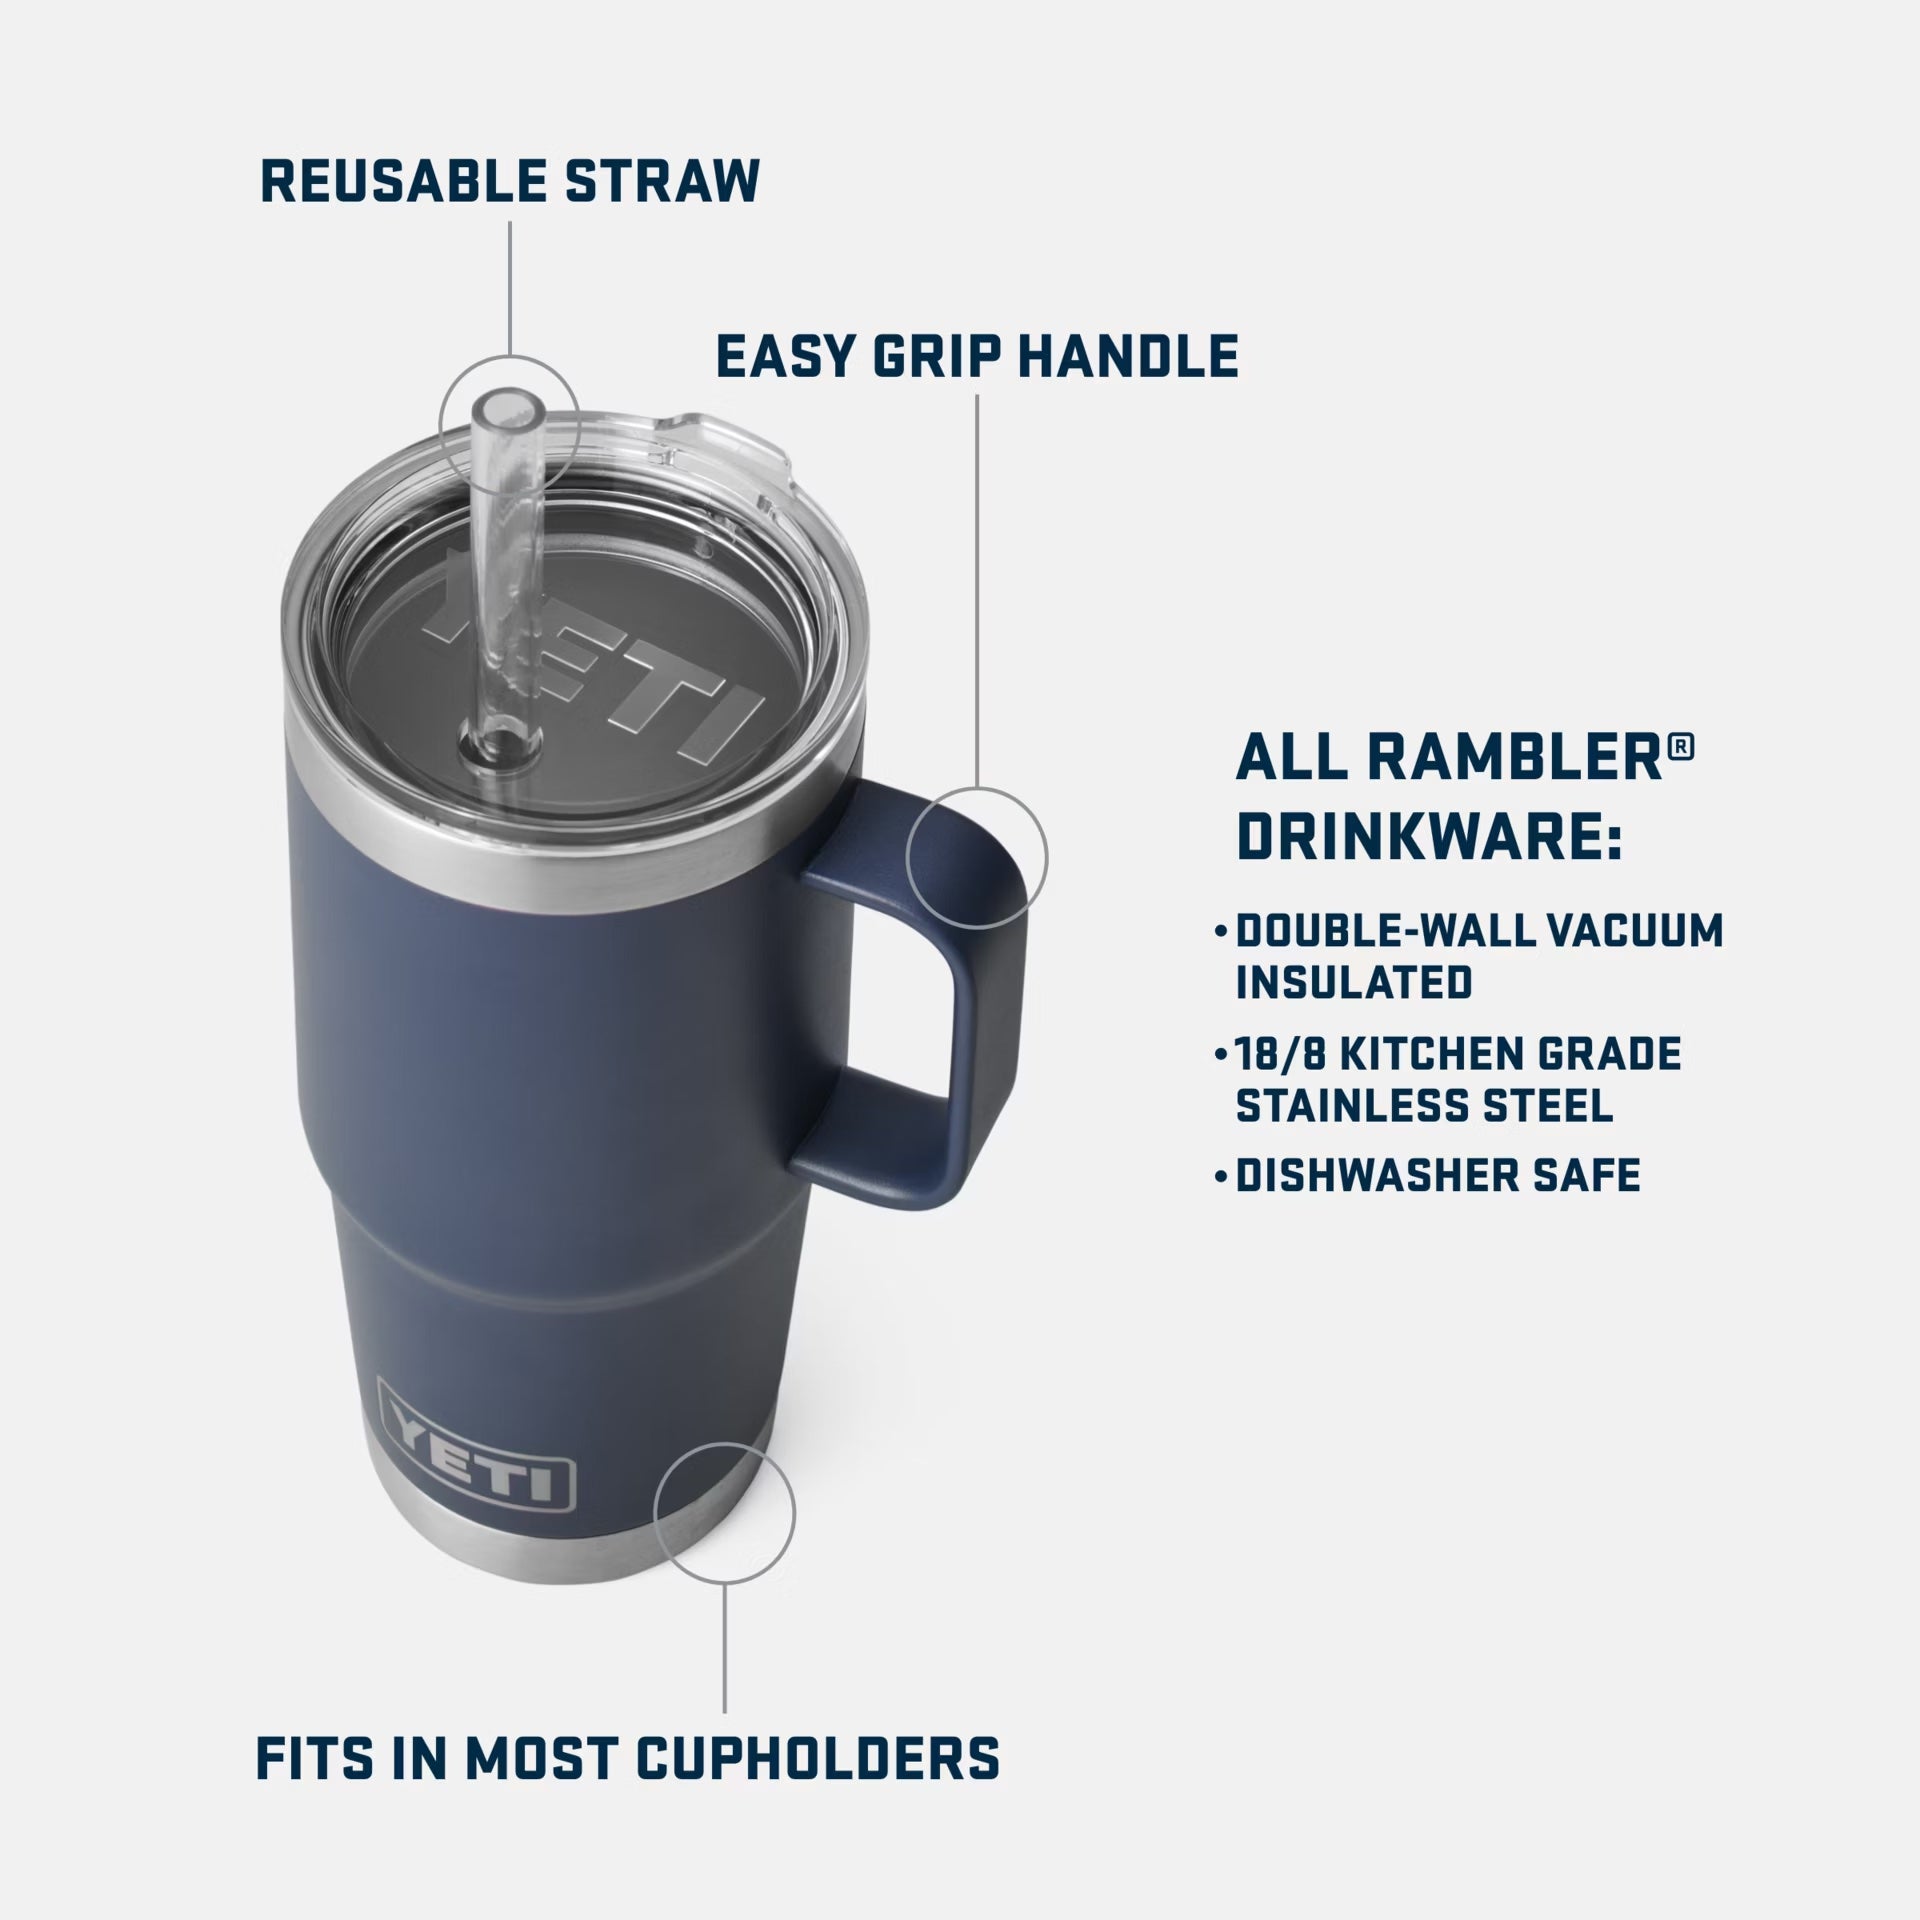 YETI Rambler 26 oz Straw Cup, Vacuum Insulated, Stainless Steel with Straw  Lid, Power Pink